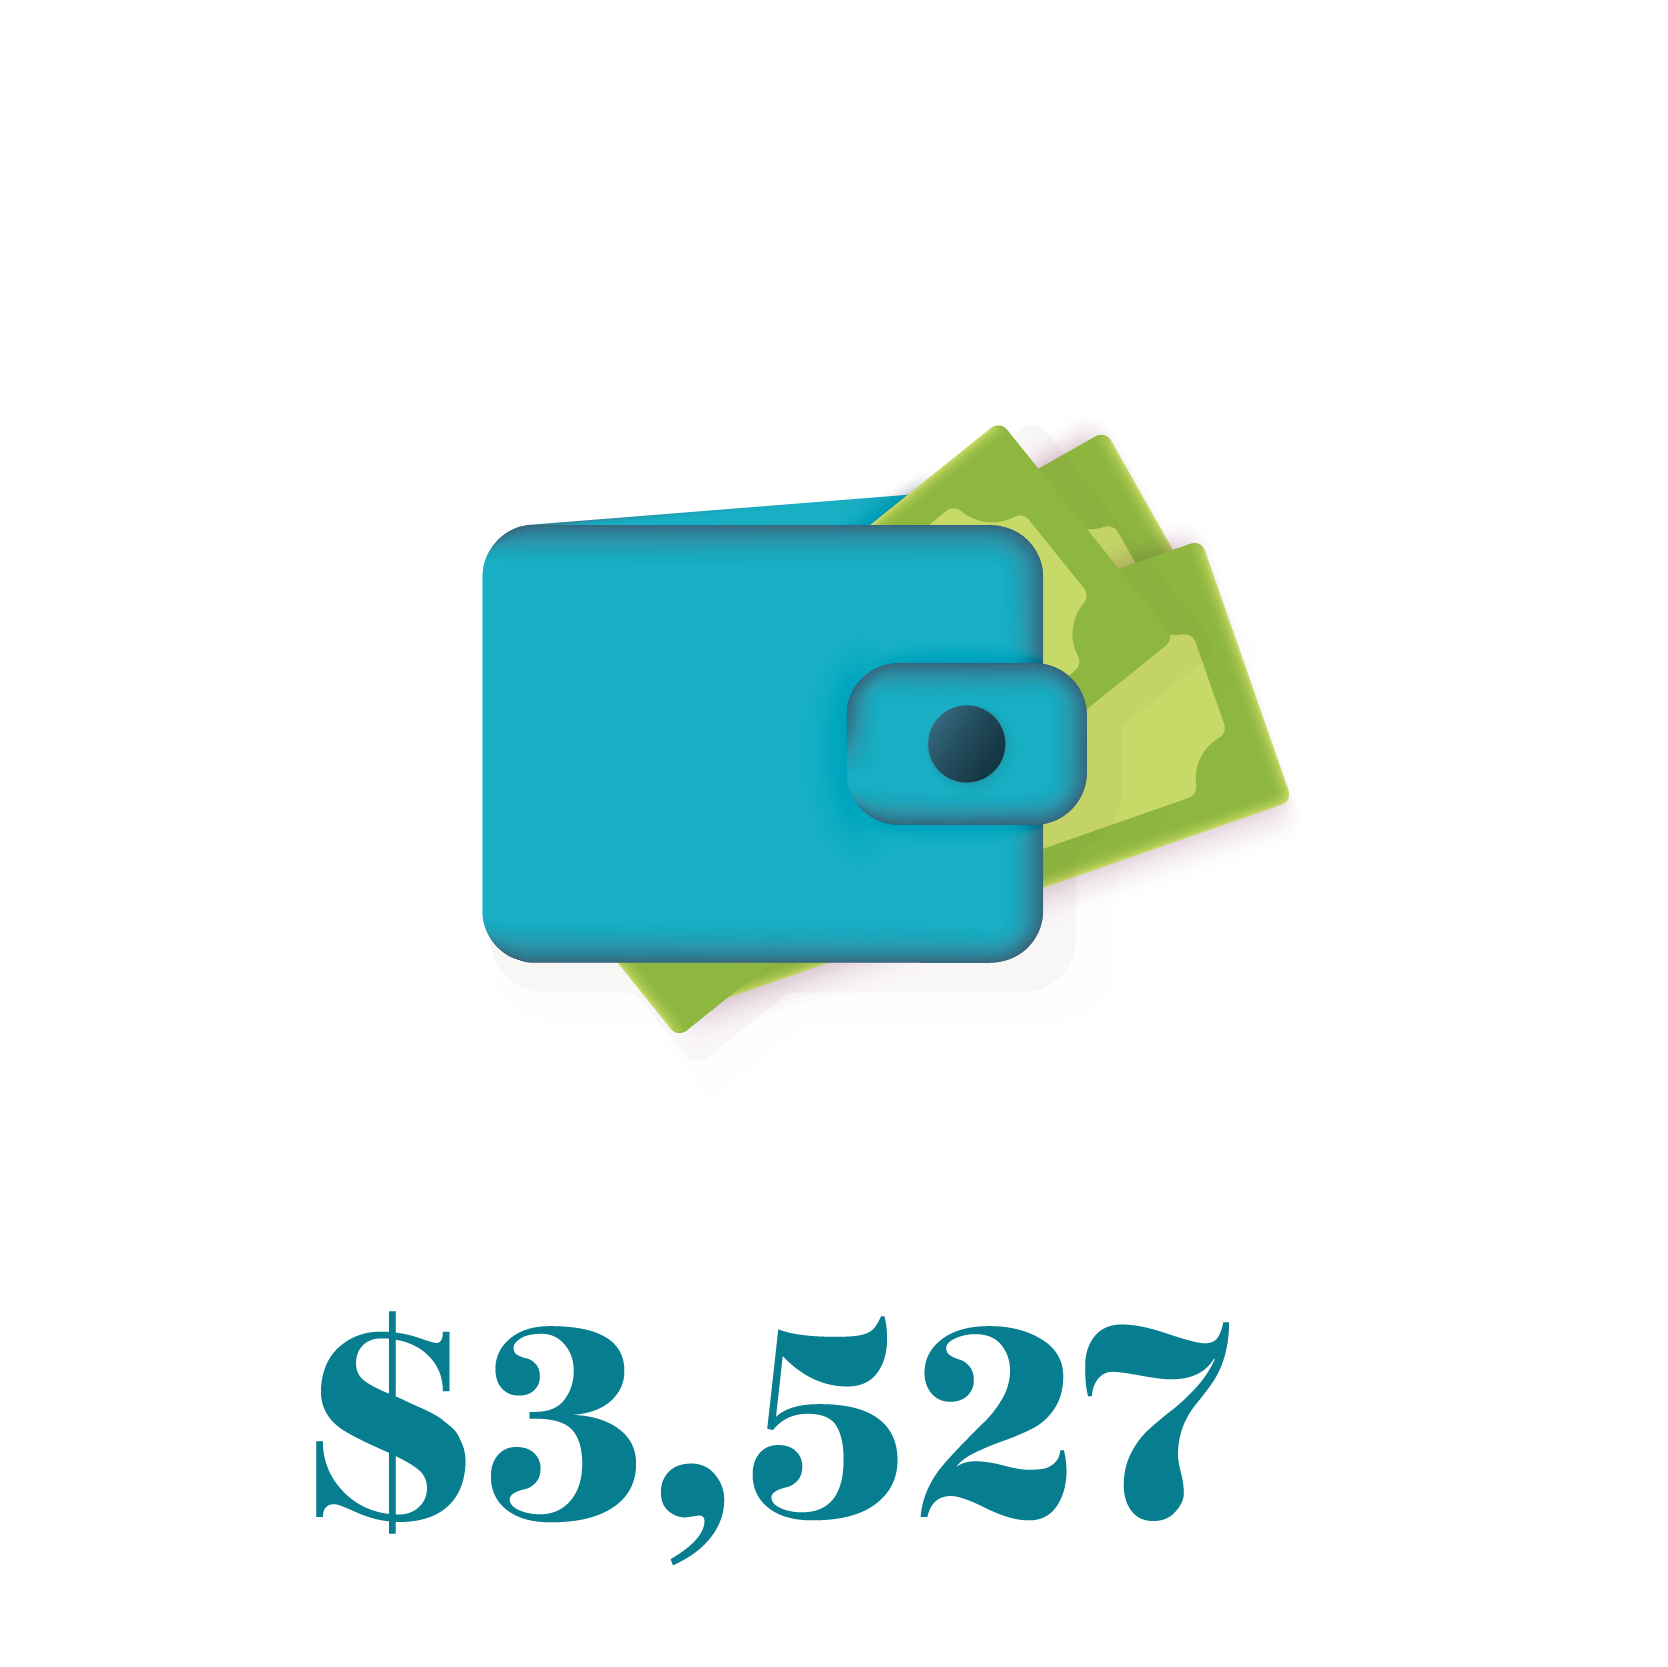 In 2019, Supply Savings Guarantee clients saved an average of $3,527 over the course of the year.